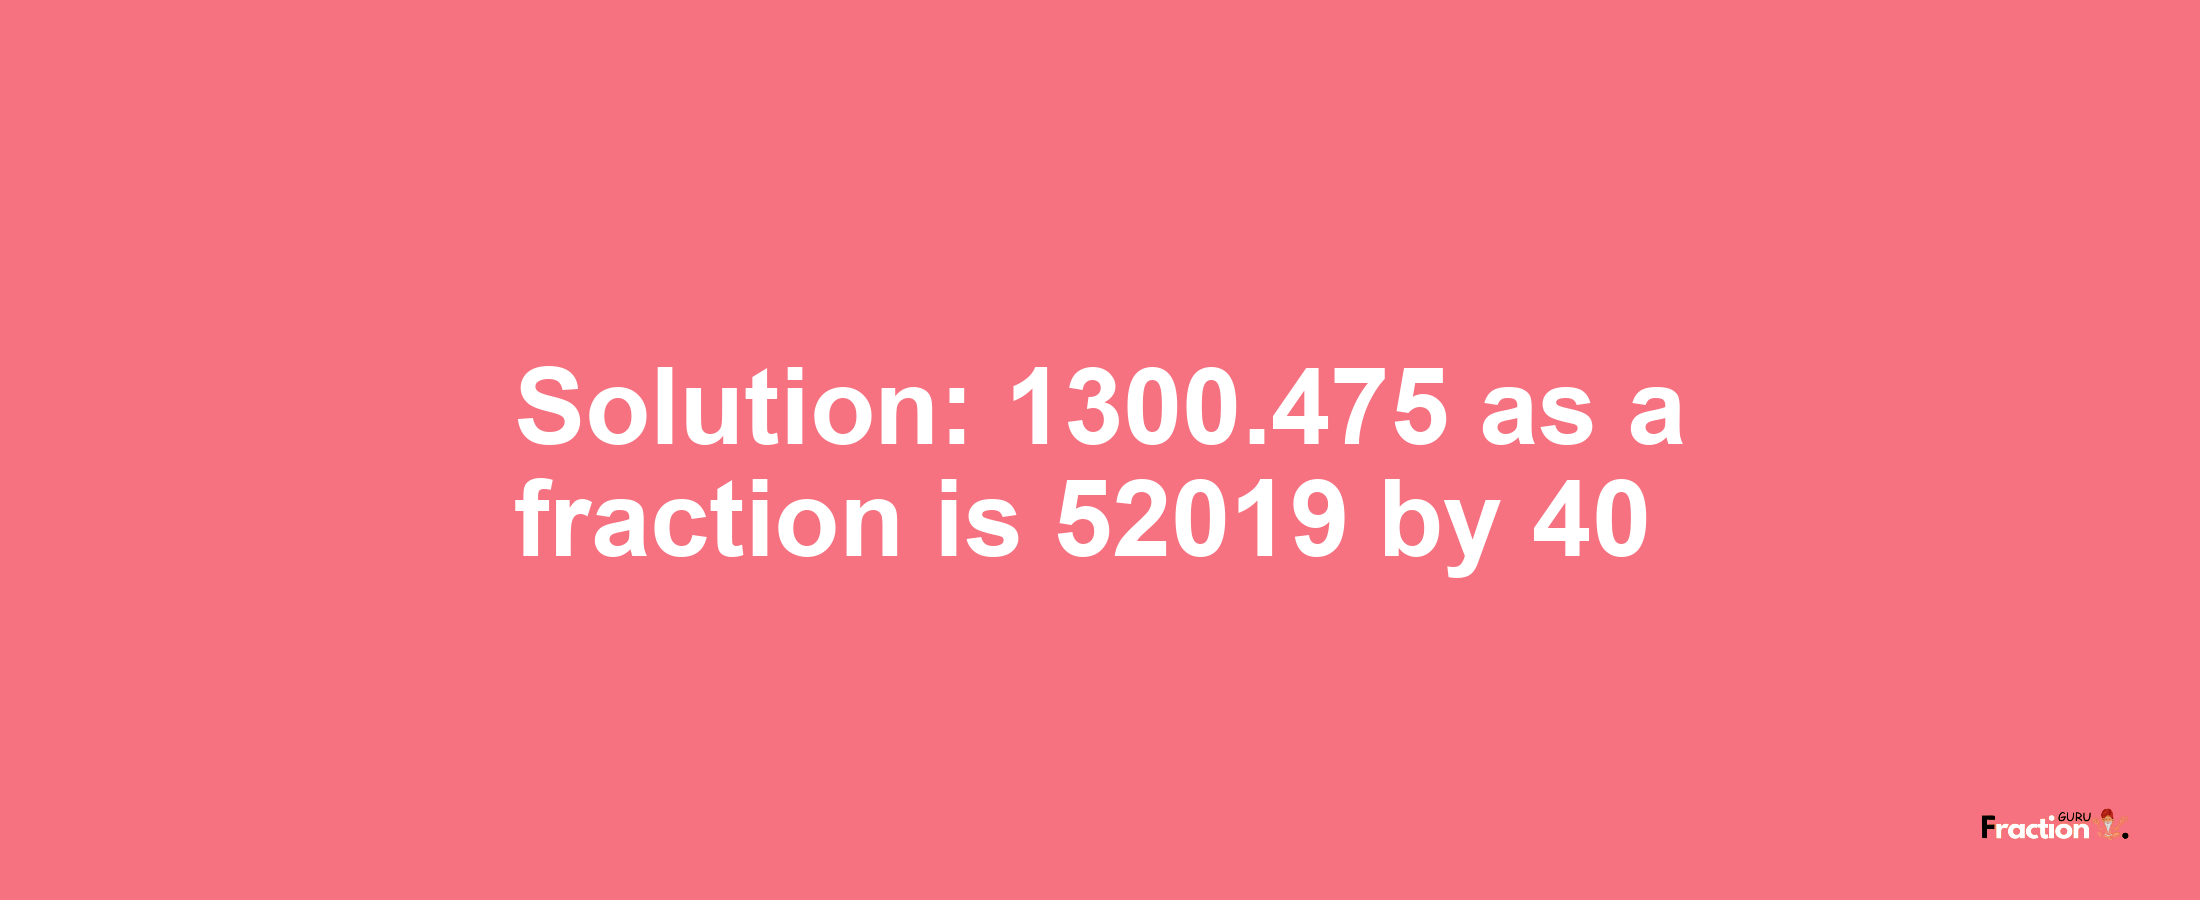 Solution:1300.475 as a fraction is 52019/40